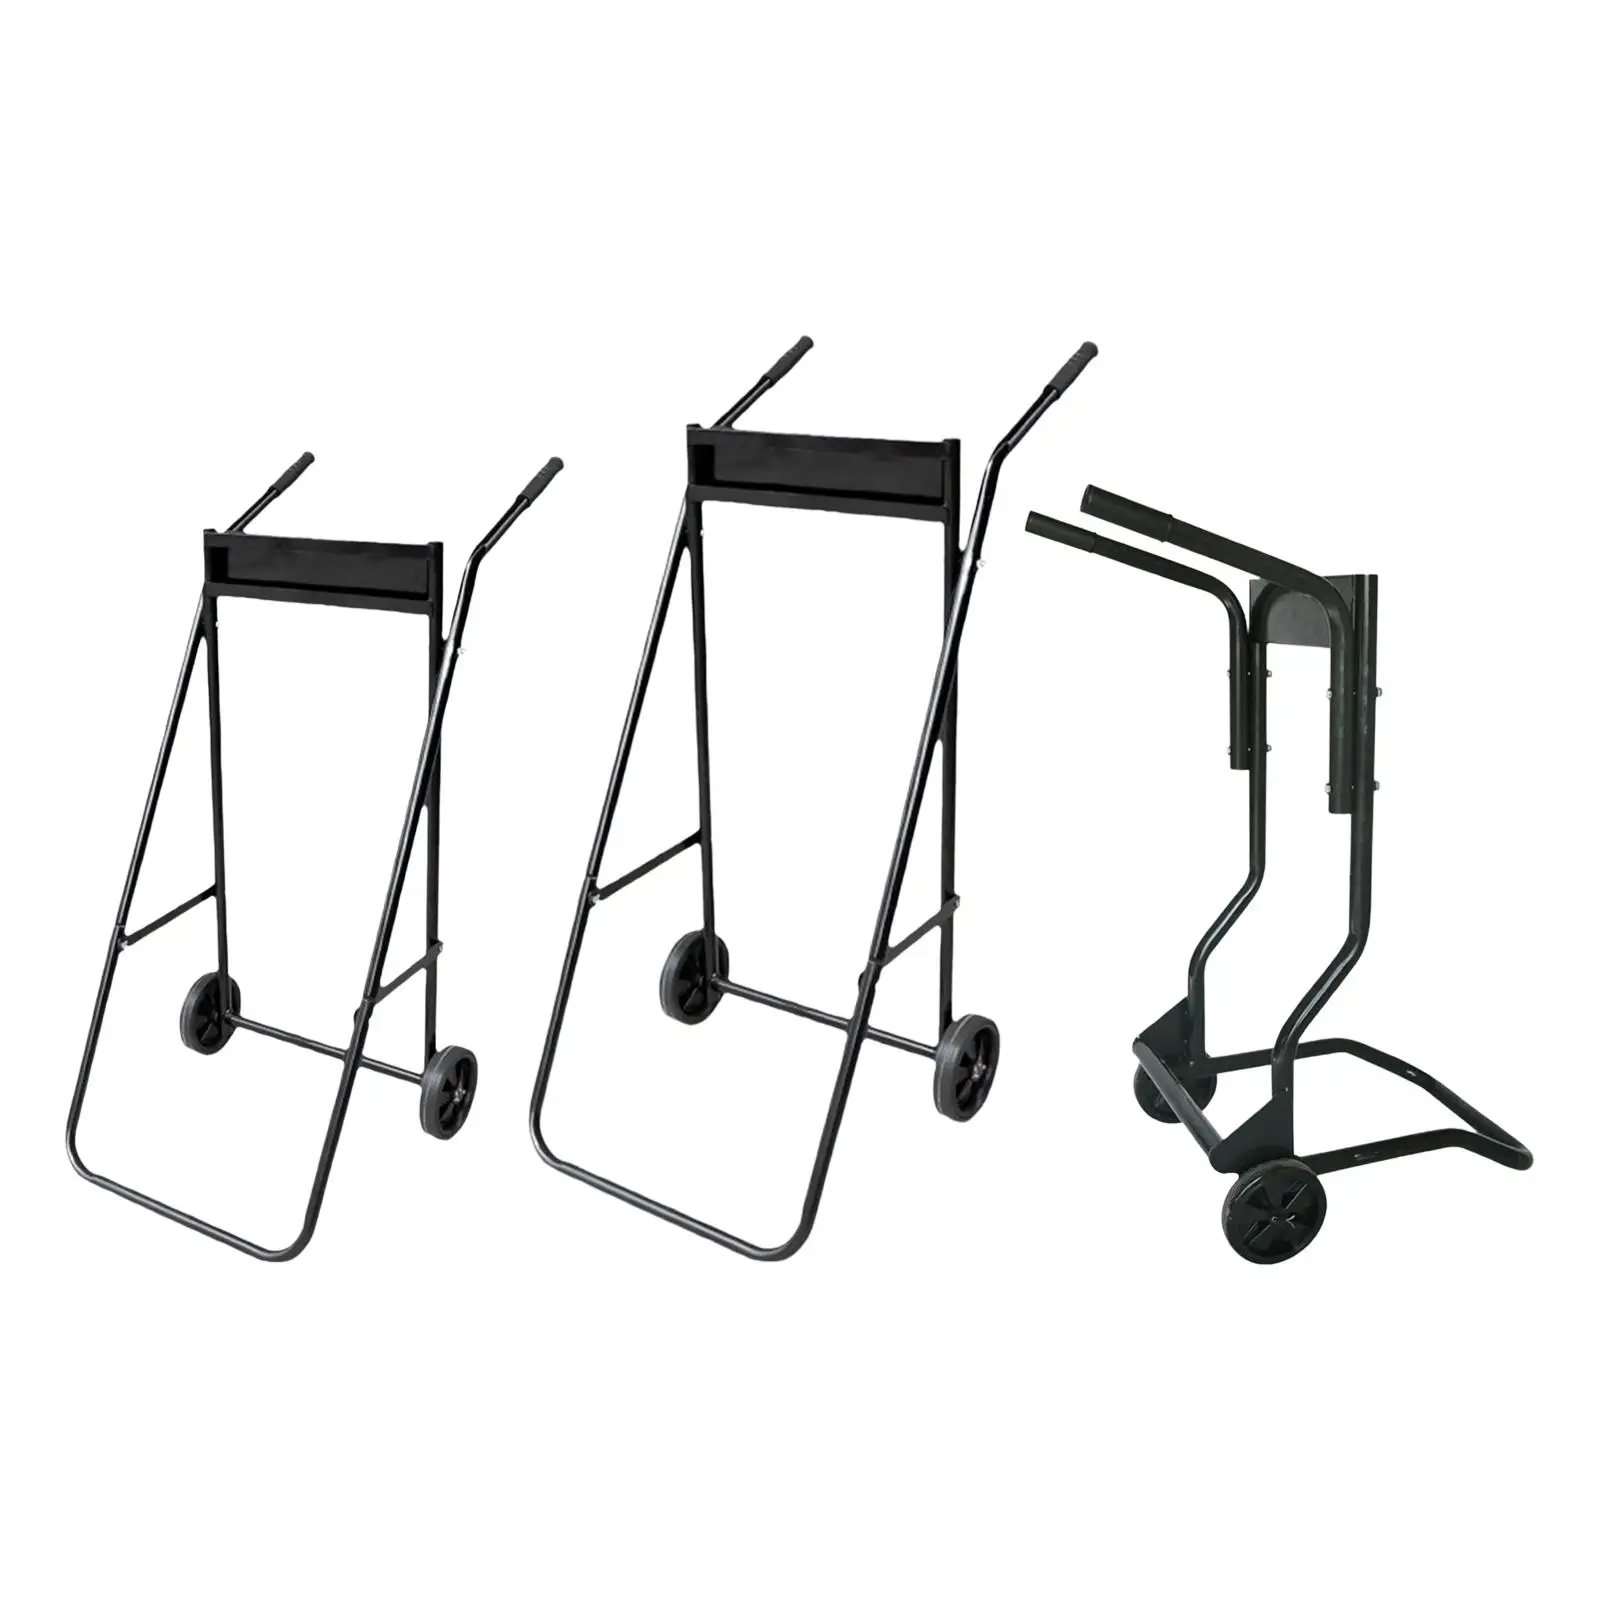 

Outboard Boat Motor Stand Multifunctional Transportation Easy to Use Sturdy Storage Carrier Cart Dolly Boat Motor Support Stand